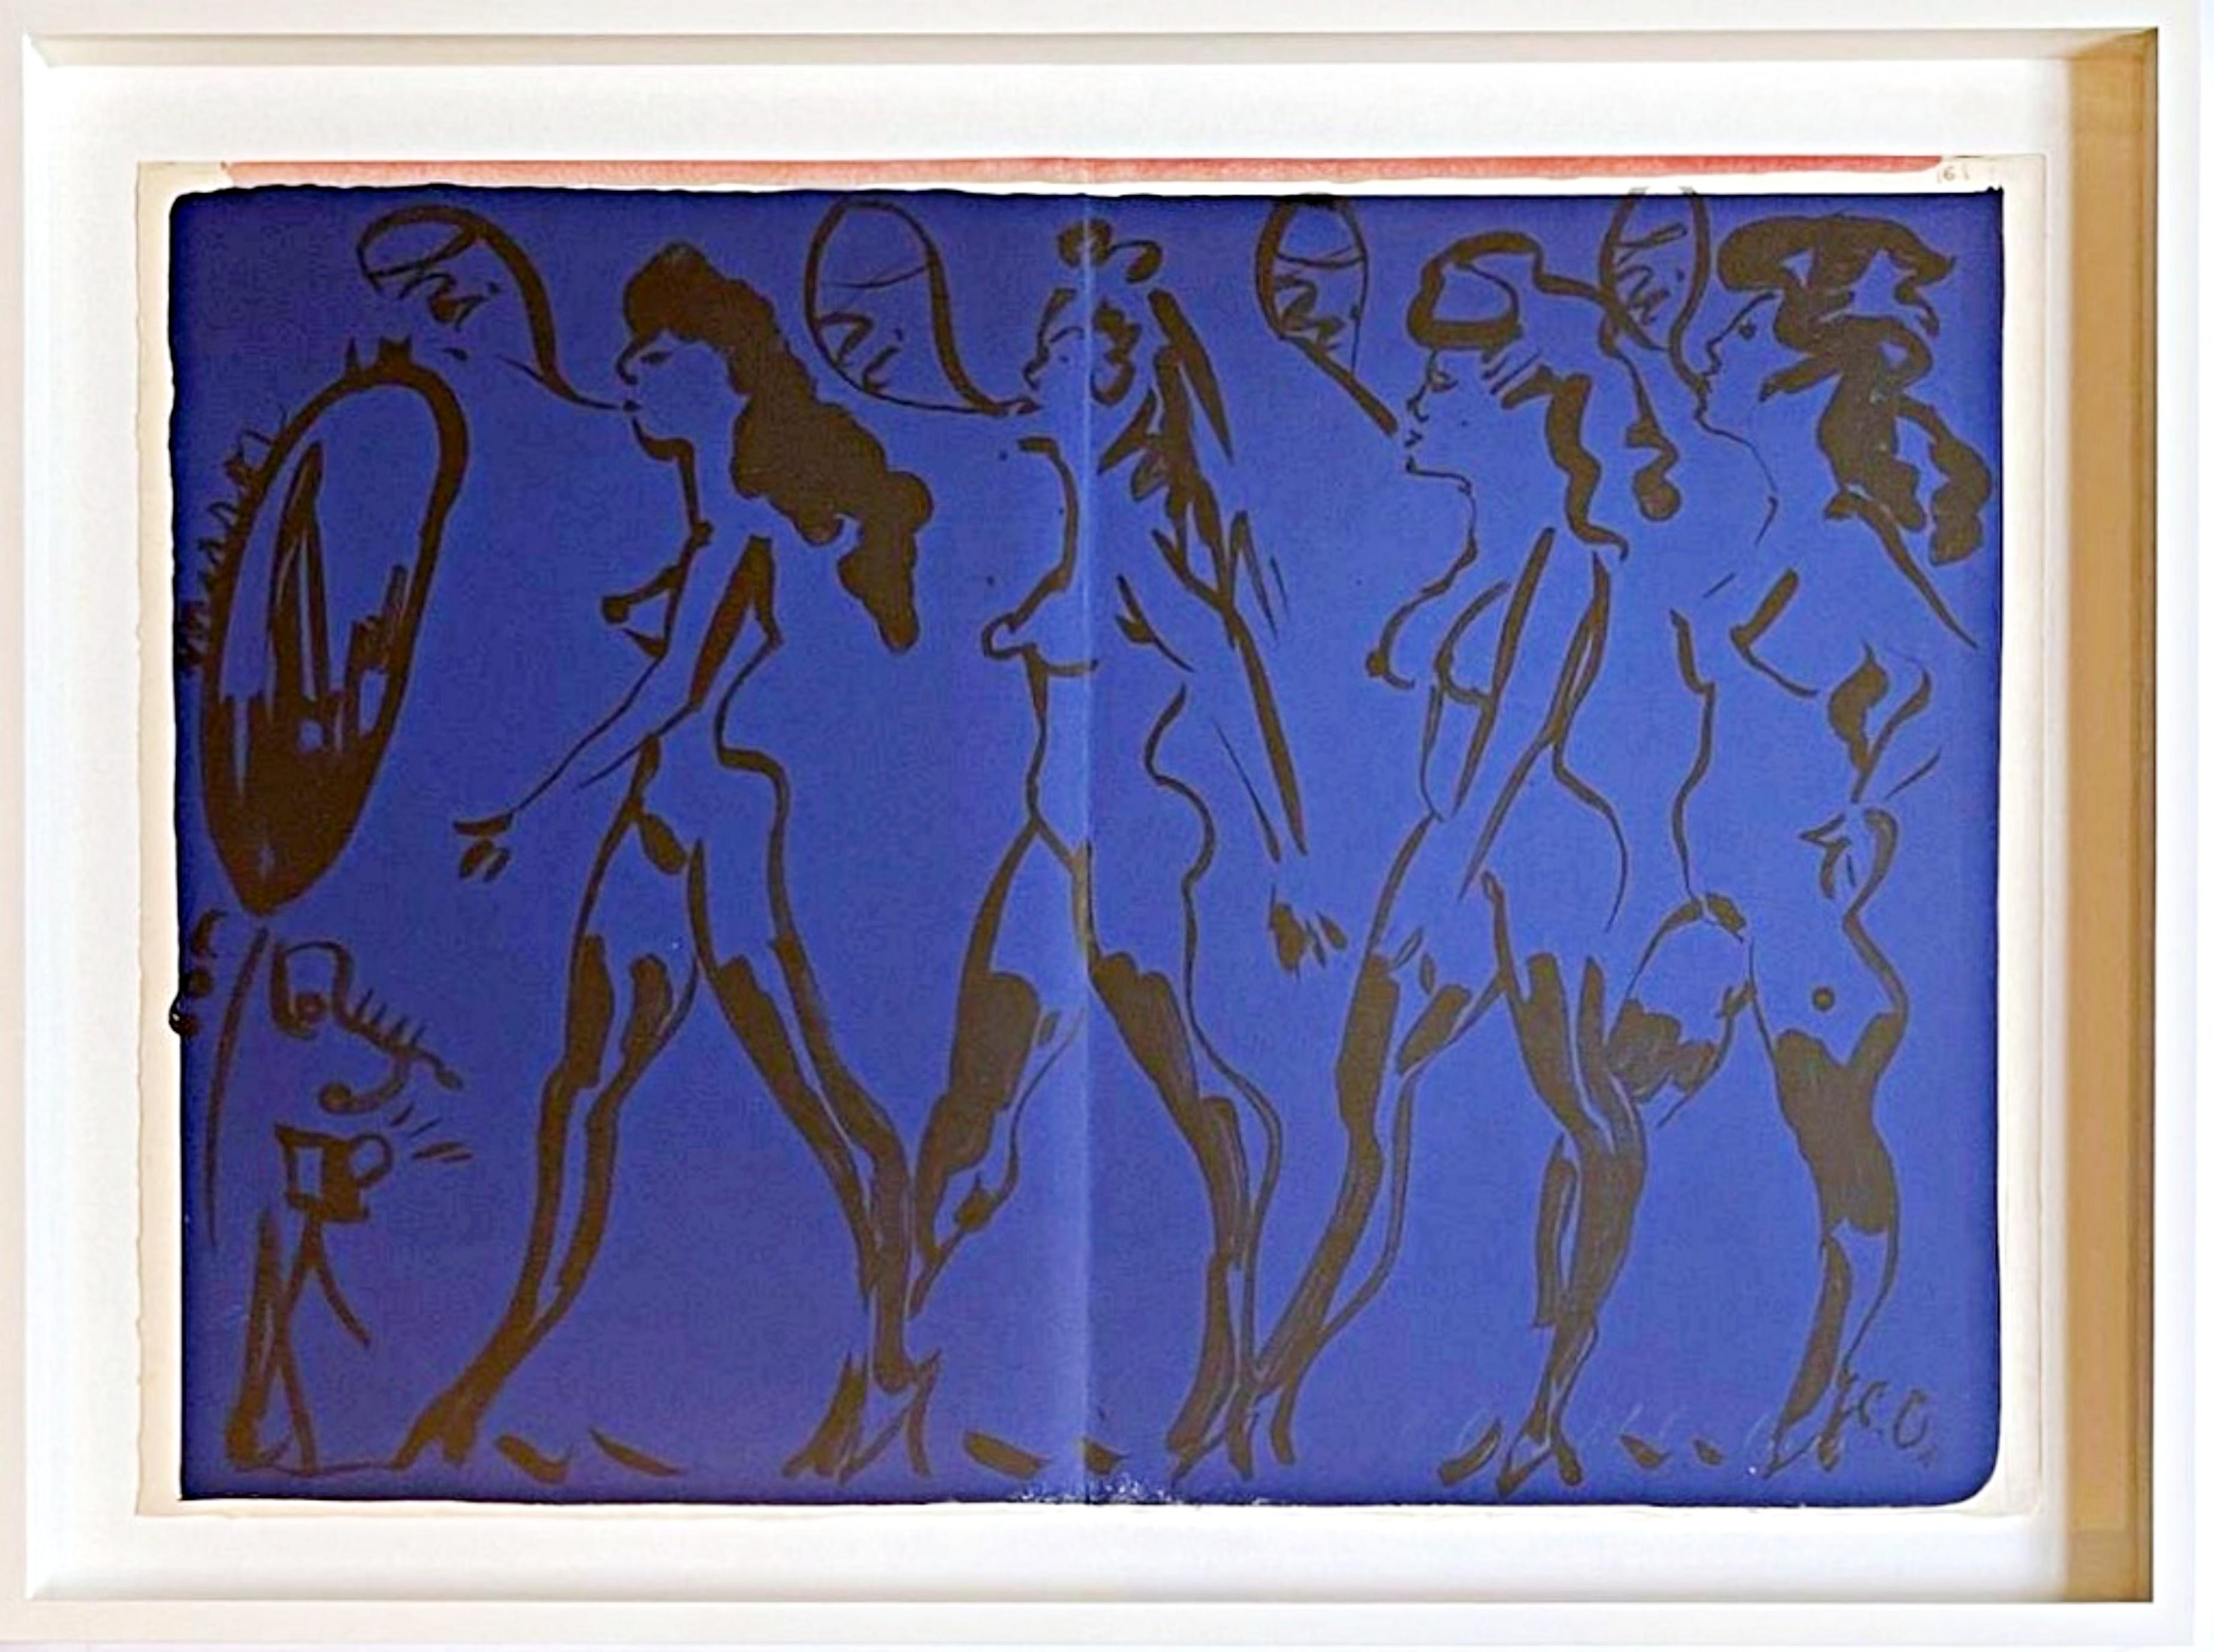 Parade of Women, from Deluxe, Hand Signed, 85/100 1 Cent Life Portfolio, Framed